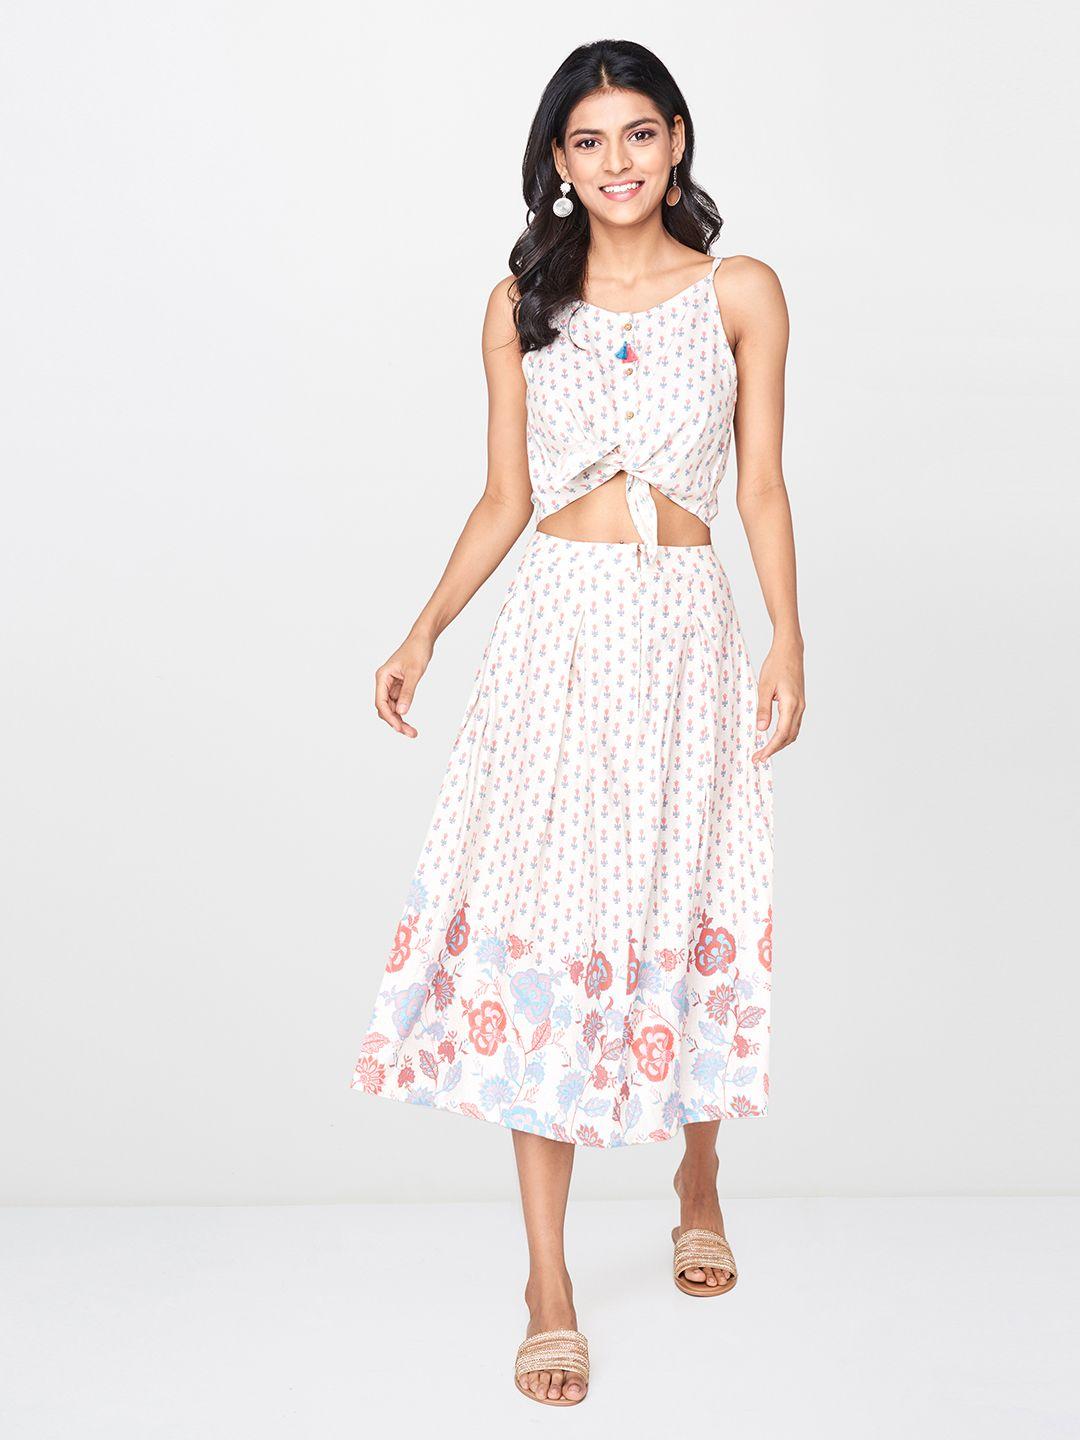 global desi women off-white & red printed top with skirt